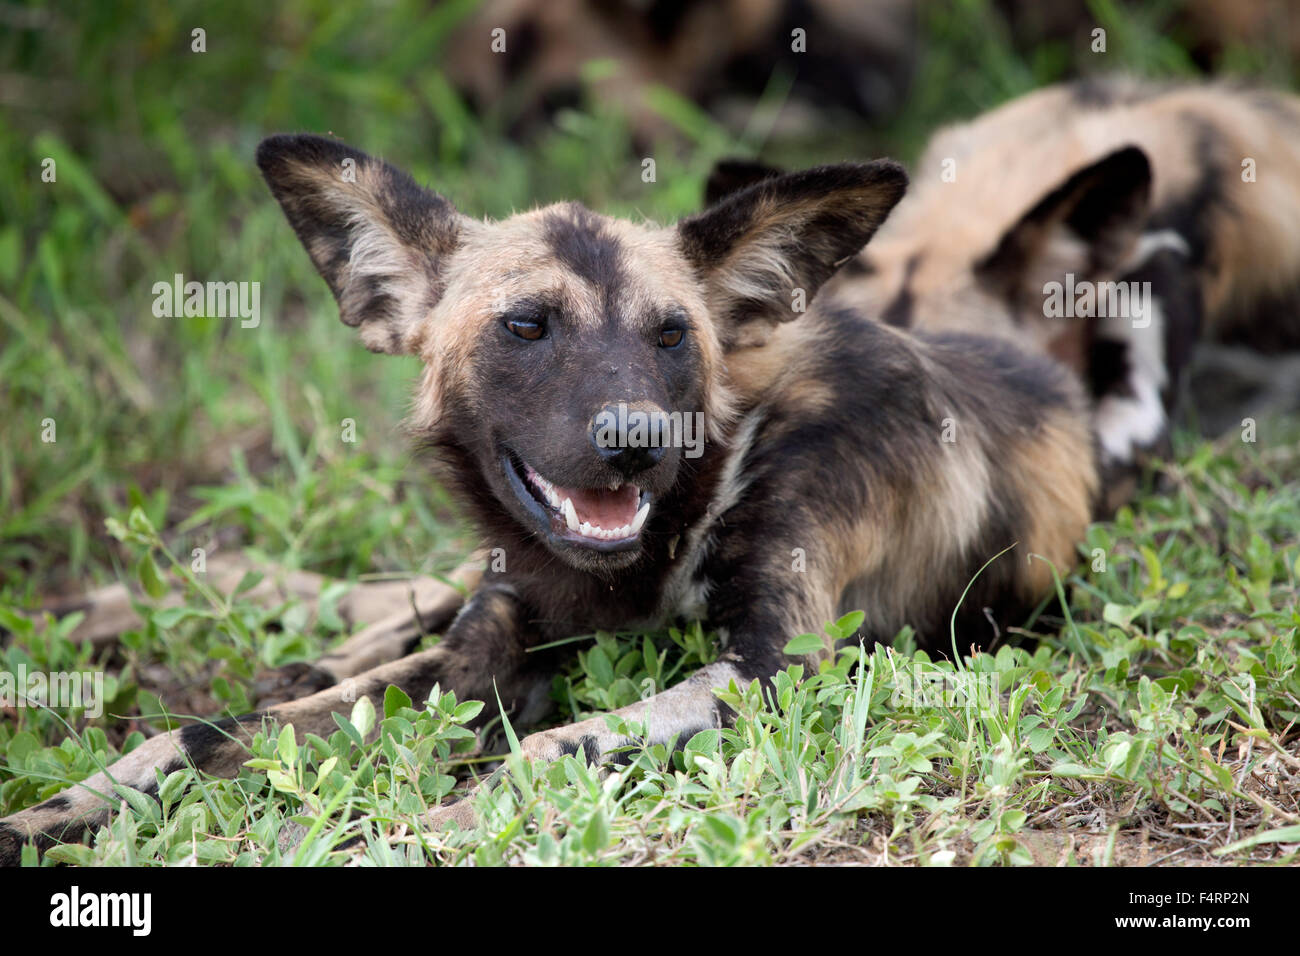 African wild dog or African painted dog (Lycaon pictus) in grass, Kruger National Park, South Africa Stock Photo